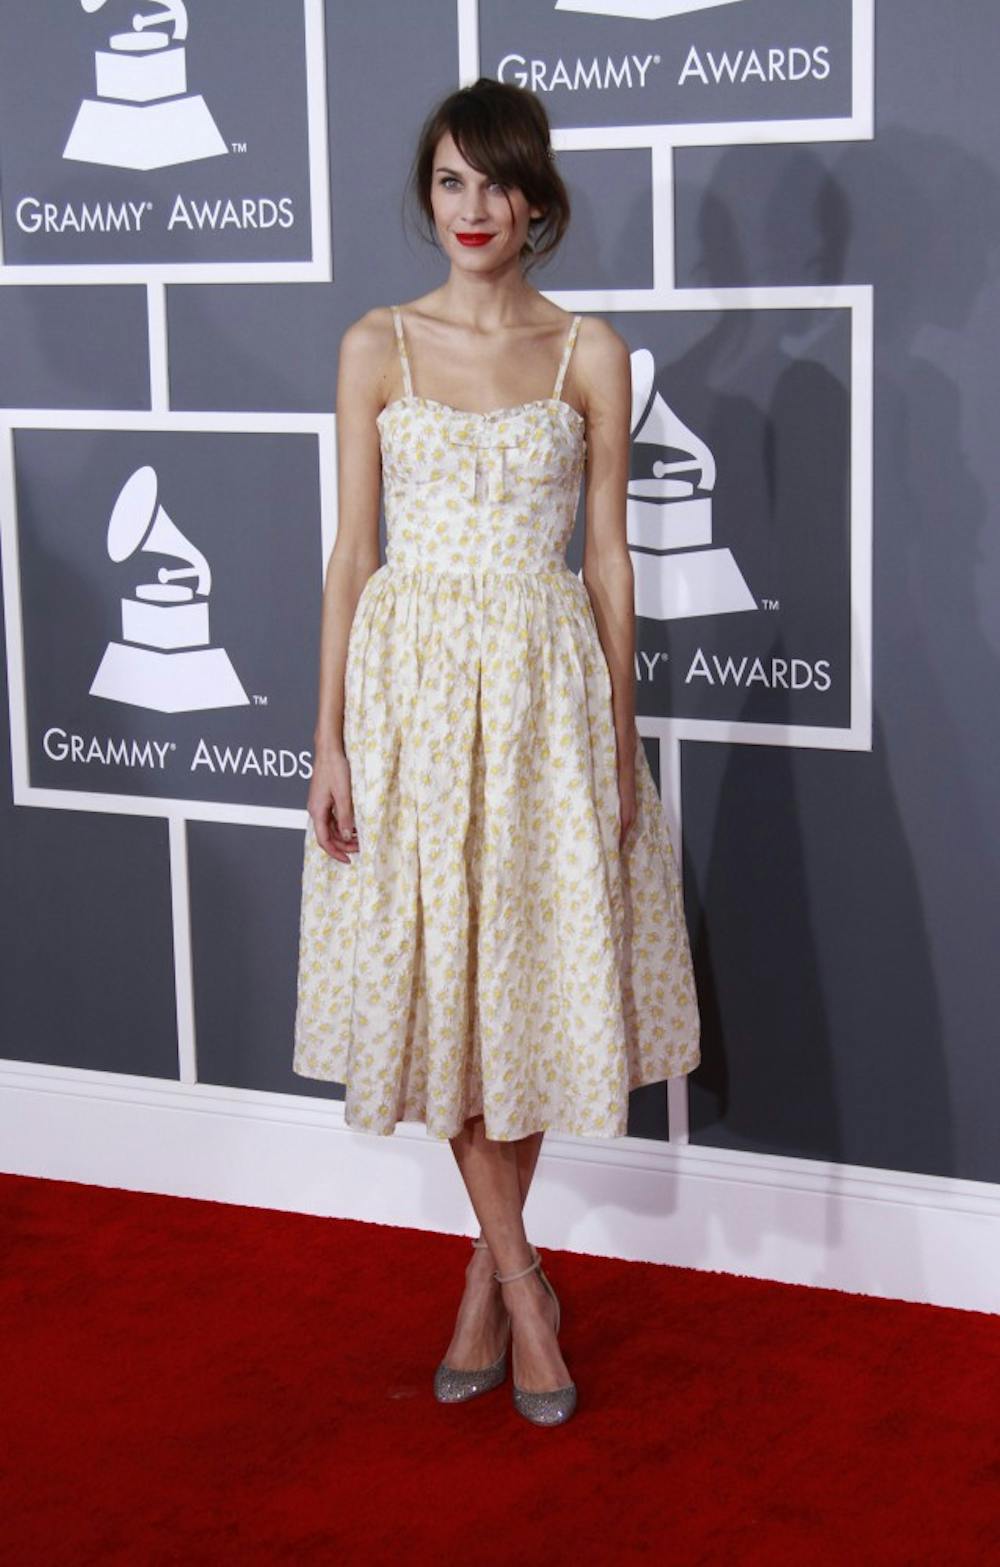 Alexa Chung arrives for the 55th Annual Grammy Awards at Staples Center in Los Angeles, California, on Sunday, February 10, 2013. (Kirk McKoy/Los Angeles Times/MCT)